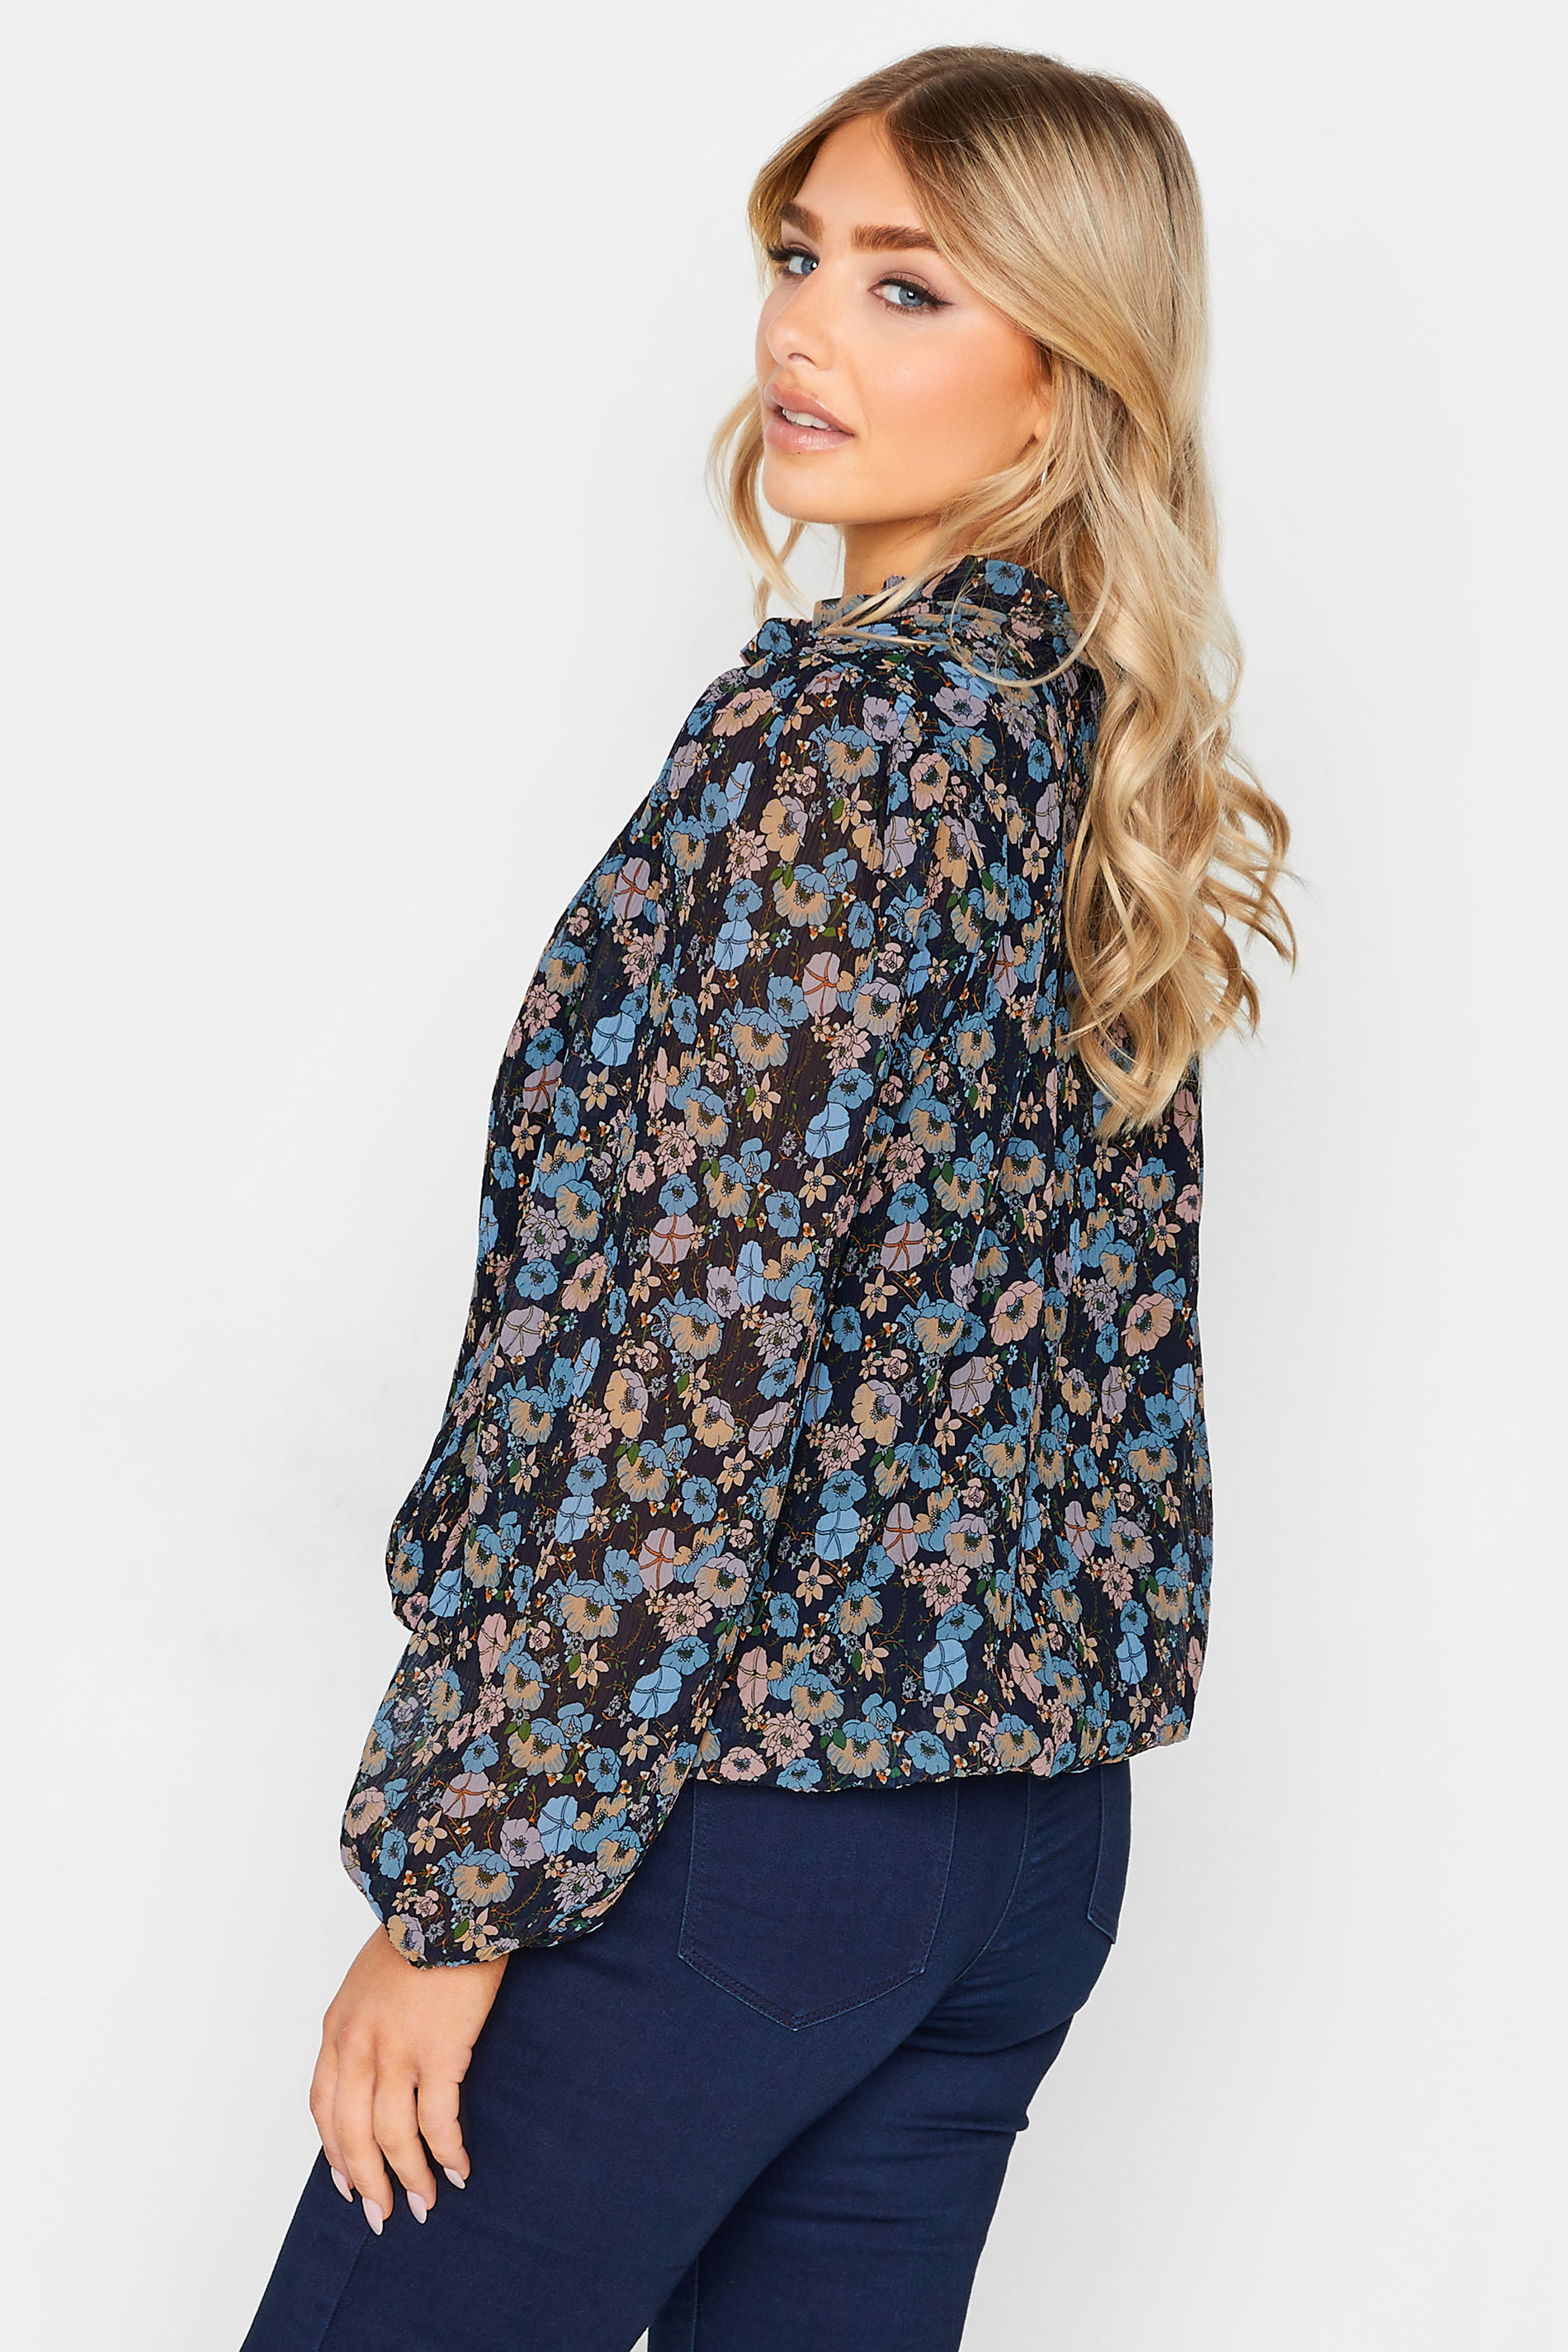 M&Co Navy Blue Floral Pleated Blouse | M&Co